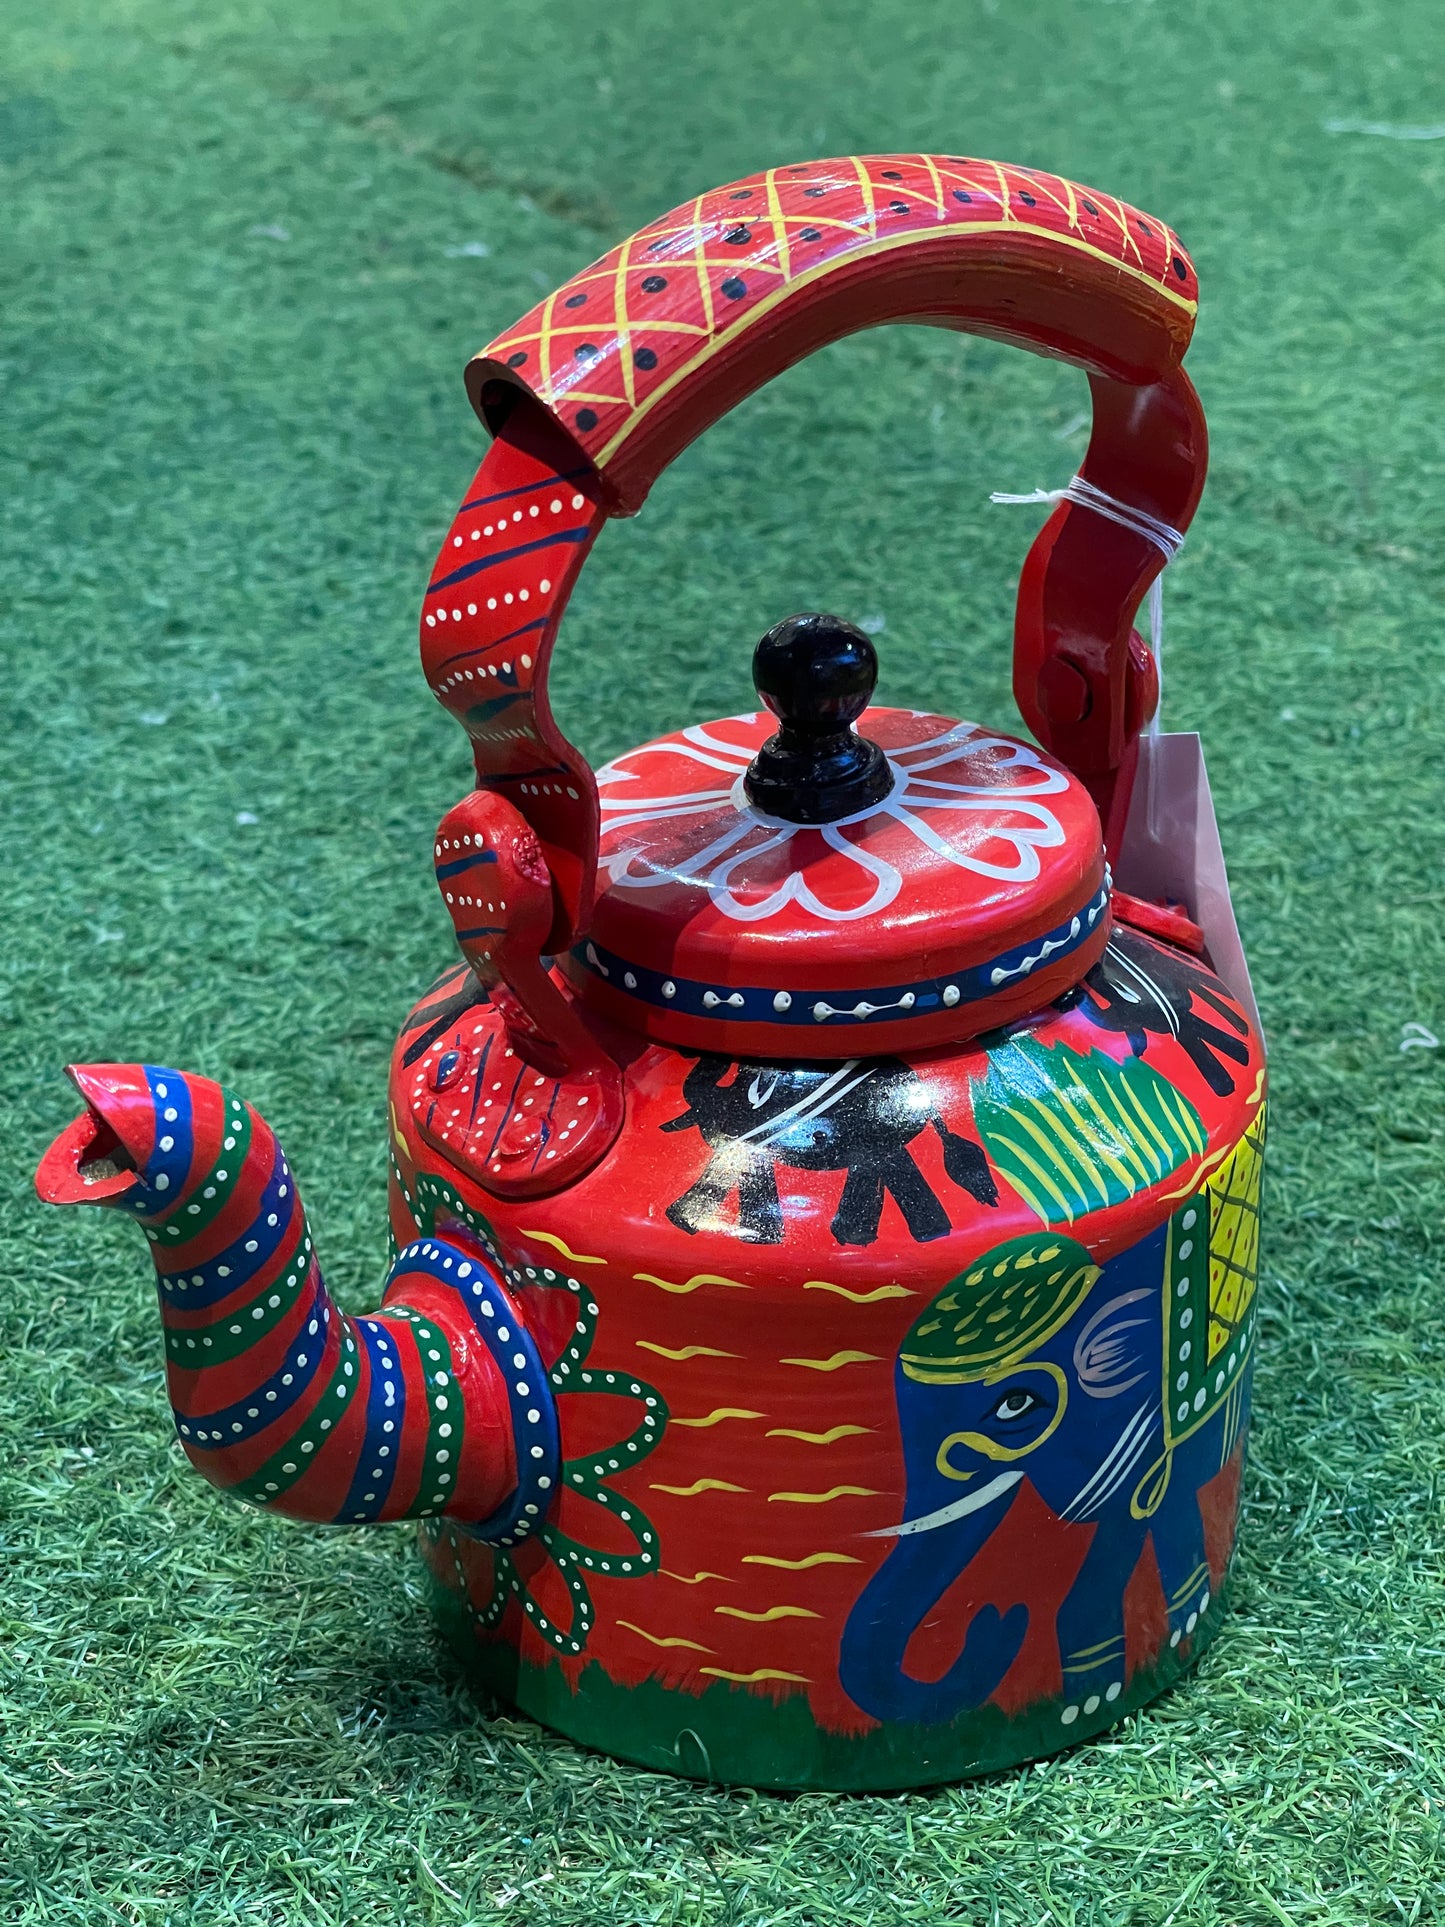 Red hand painted decorative kettle with elephants design